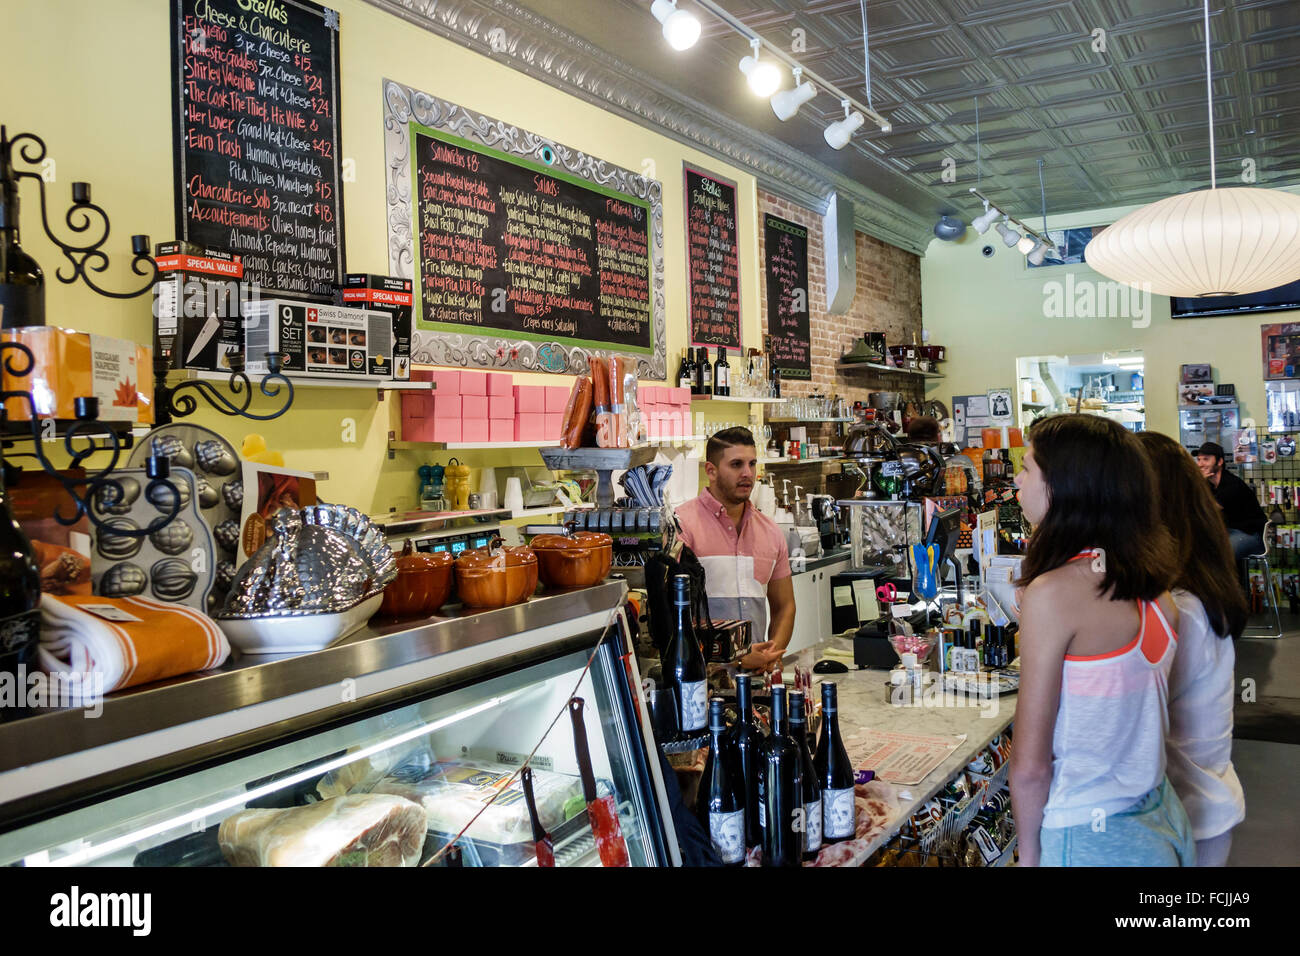 Florida,South,Ocala,downtown,SW Broadway Street,Stella's Modern Pantry,restaurant restaurants food dining eating out cafe cafes bistro,interior inside Stock Photo